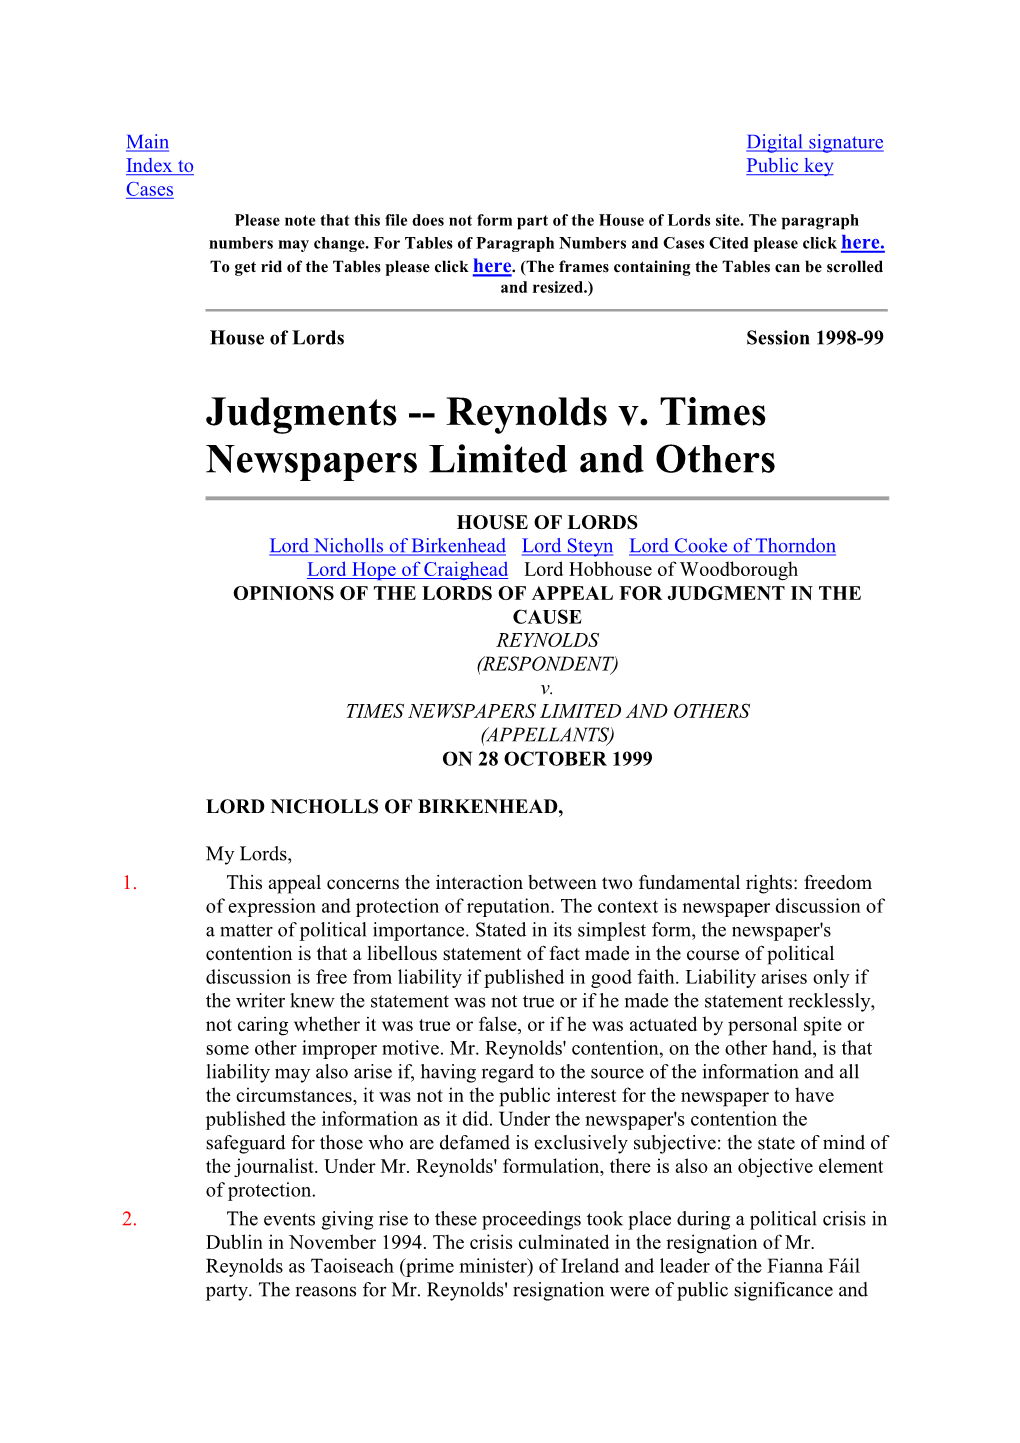 Reynolds V. Times Ewspapers Limited and Others